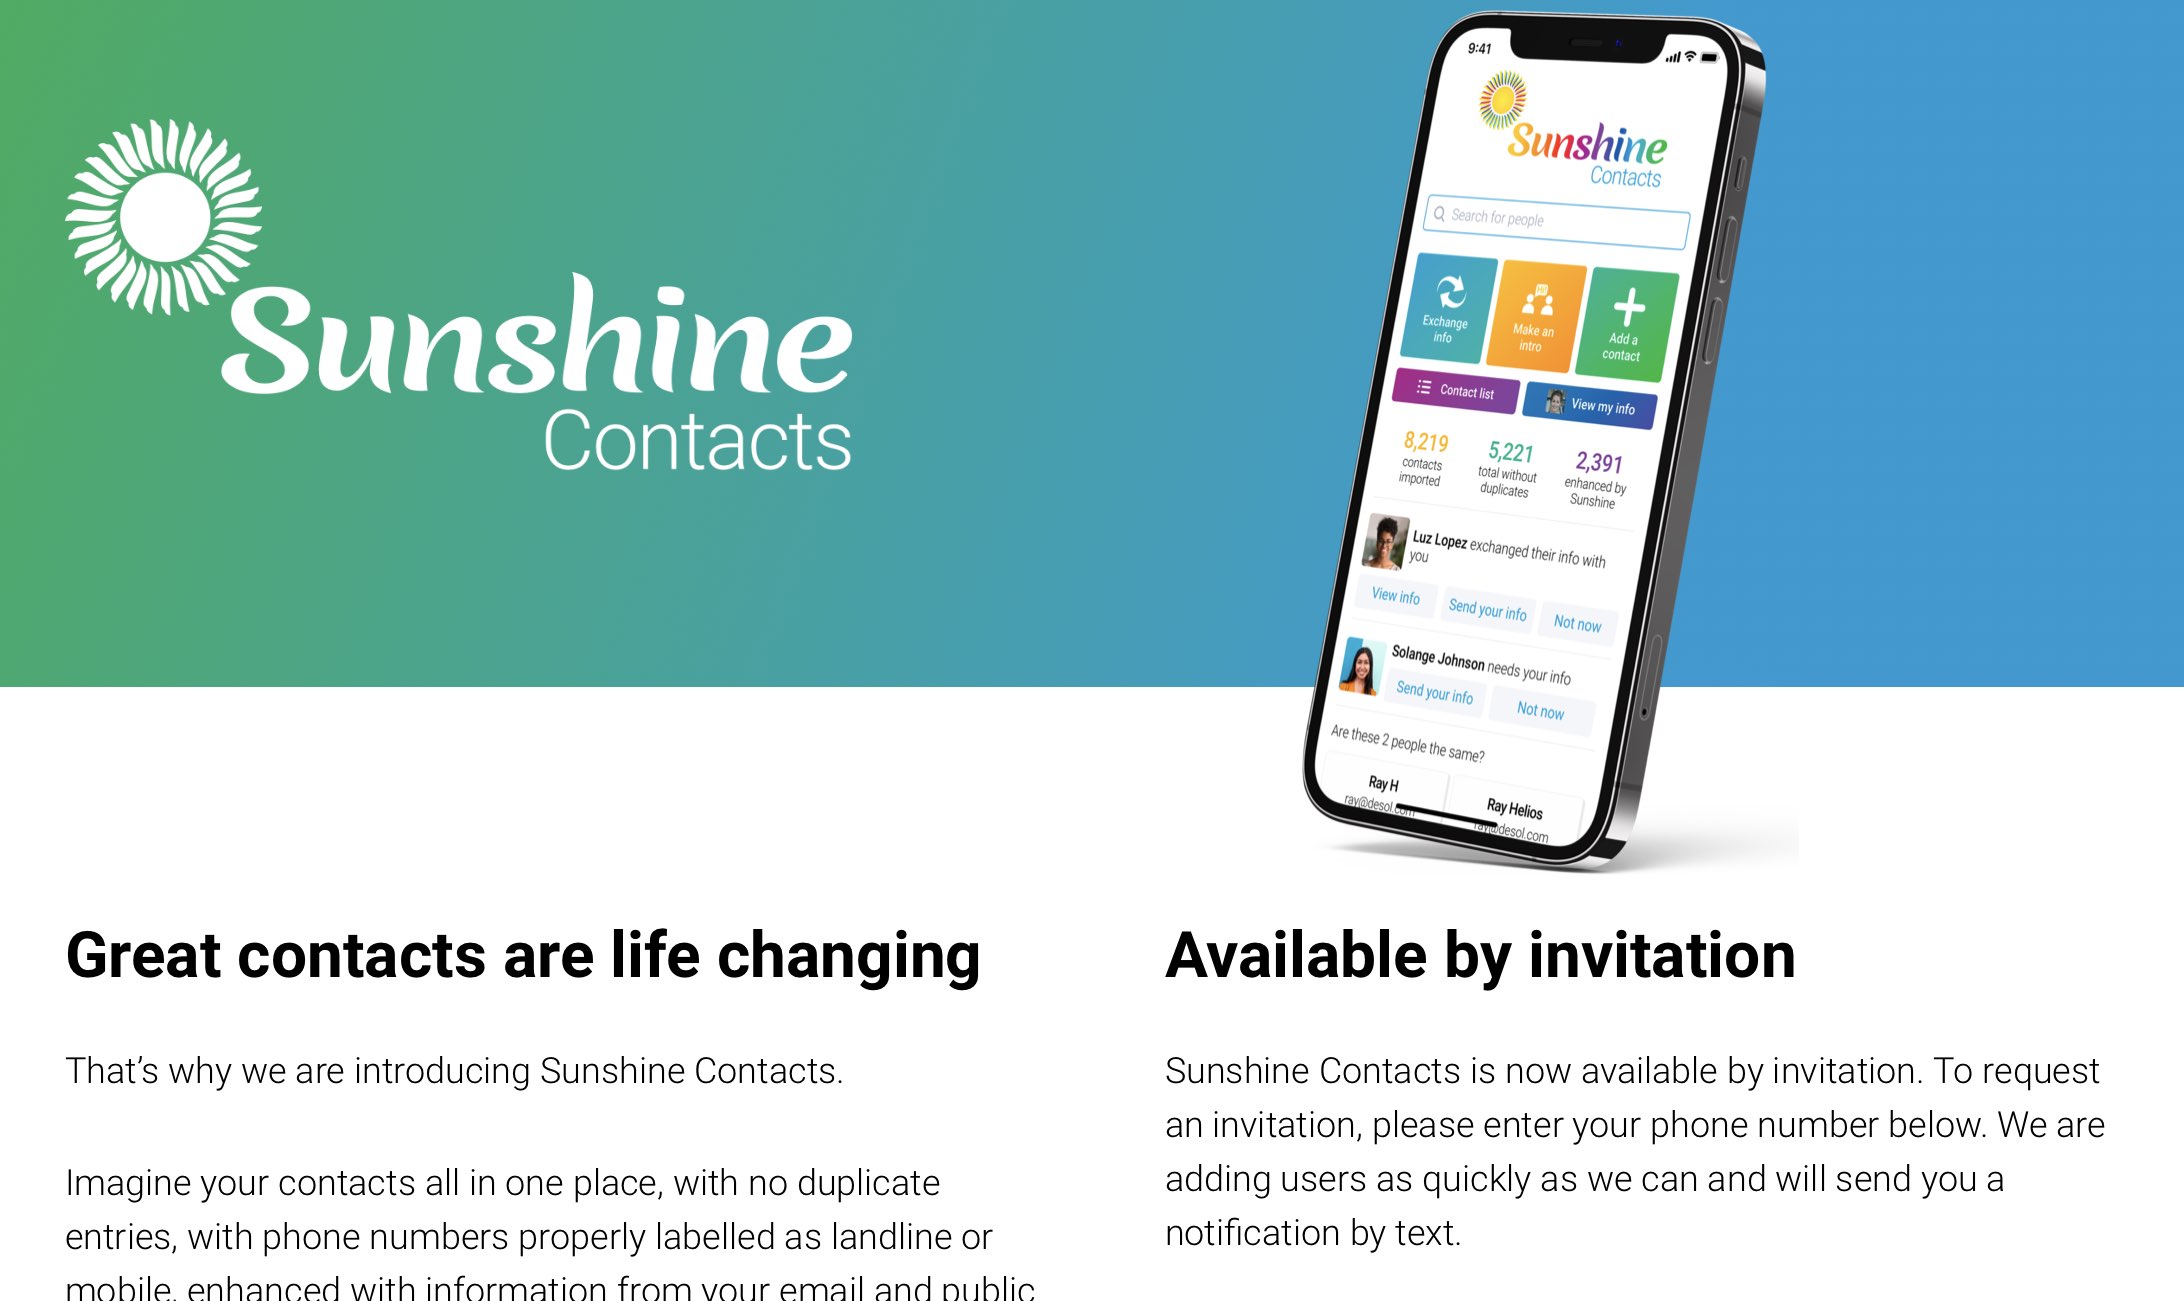 Sunshine Contacts promises to make sure your contacts app has up-to-date information.